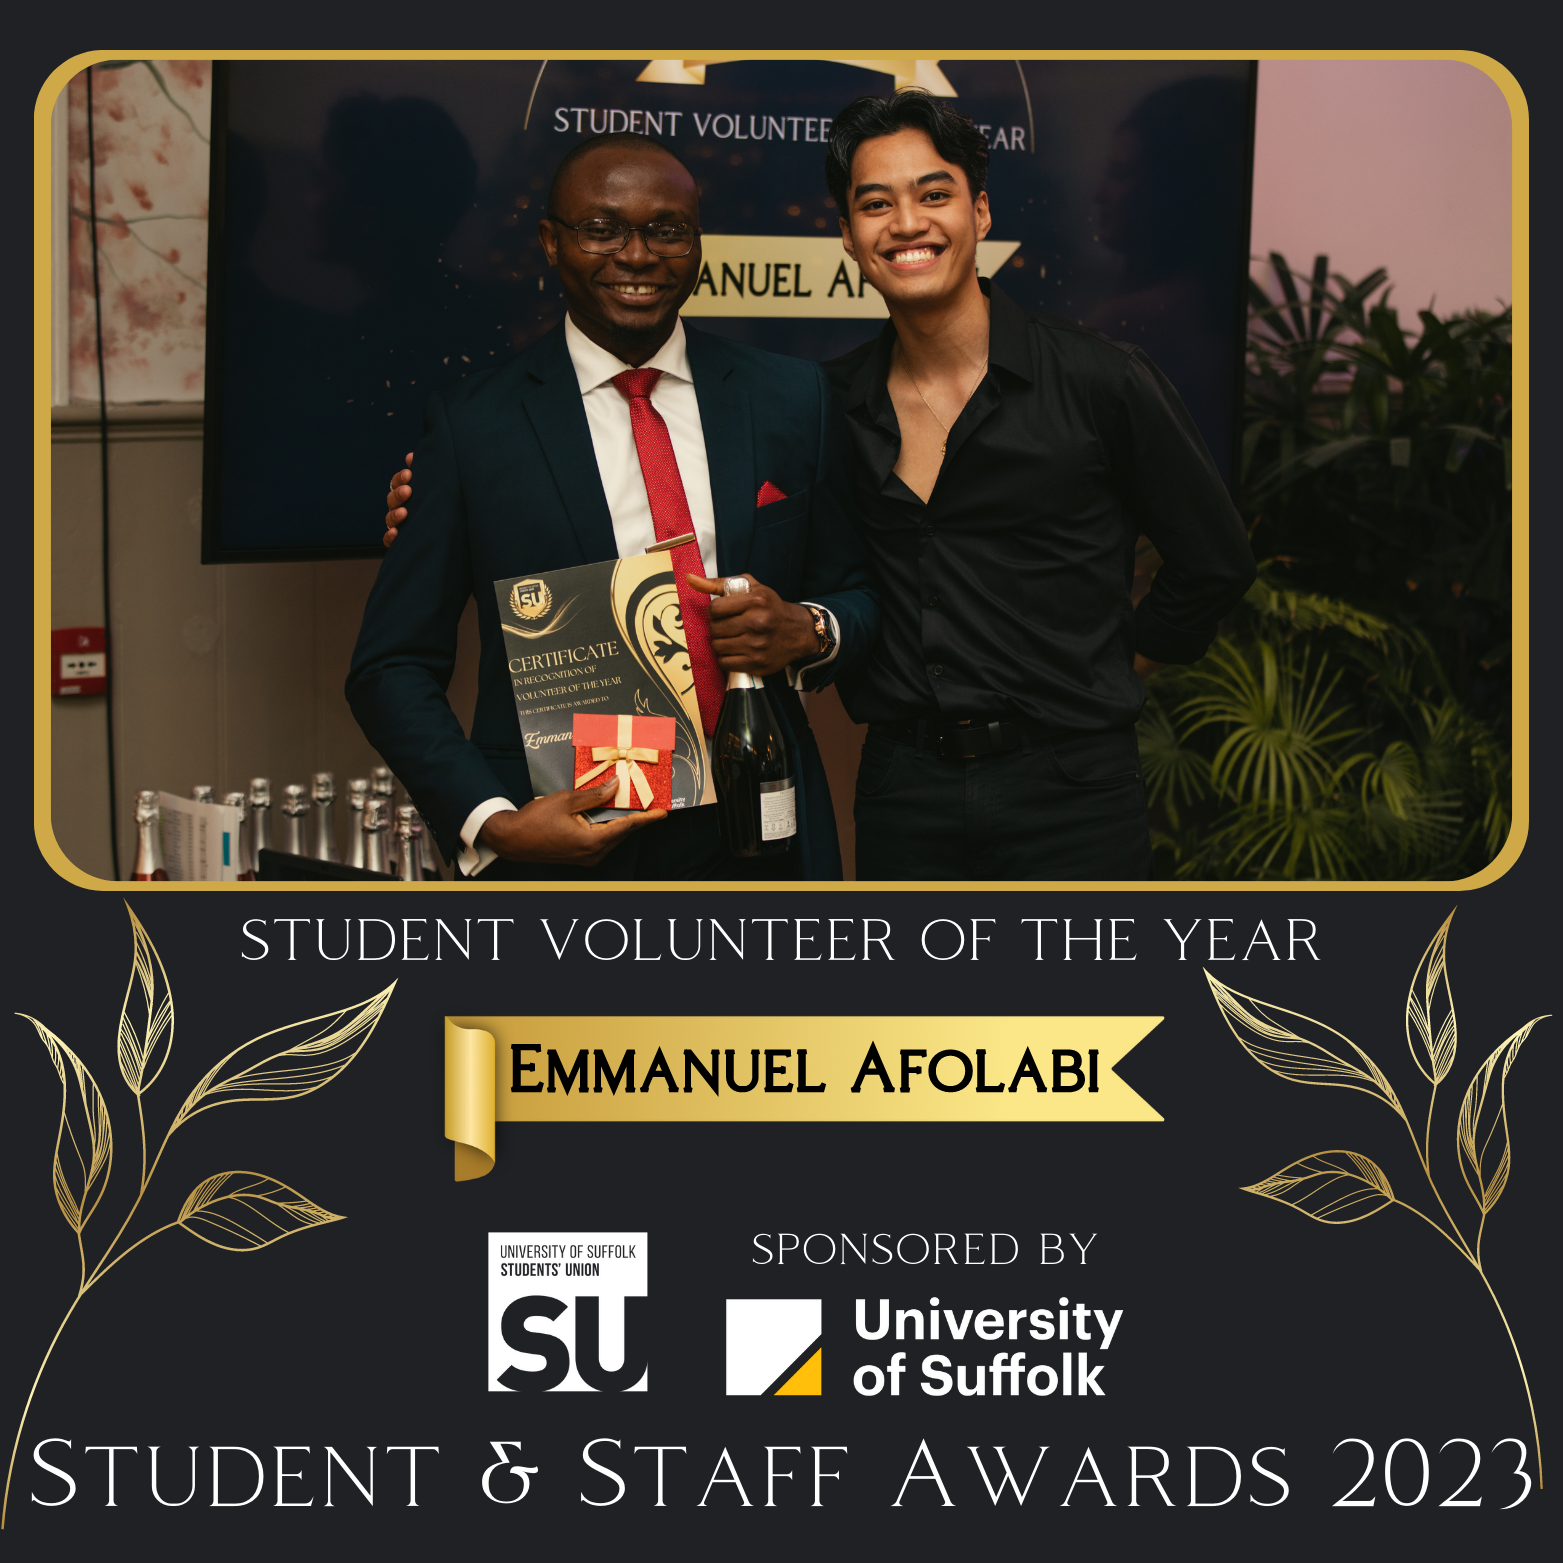 student volunteer of the year, emmanuel afolabi, pictured holding his certificate with awards host derrick muncada